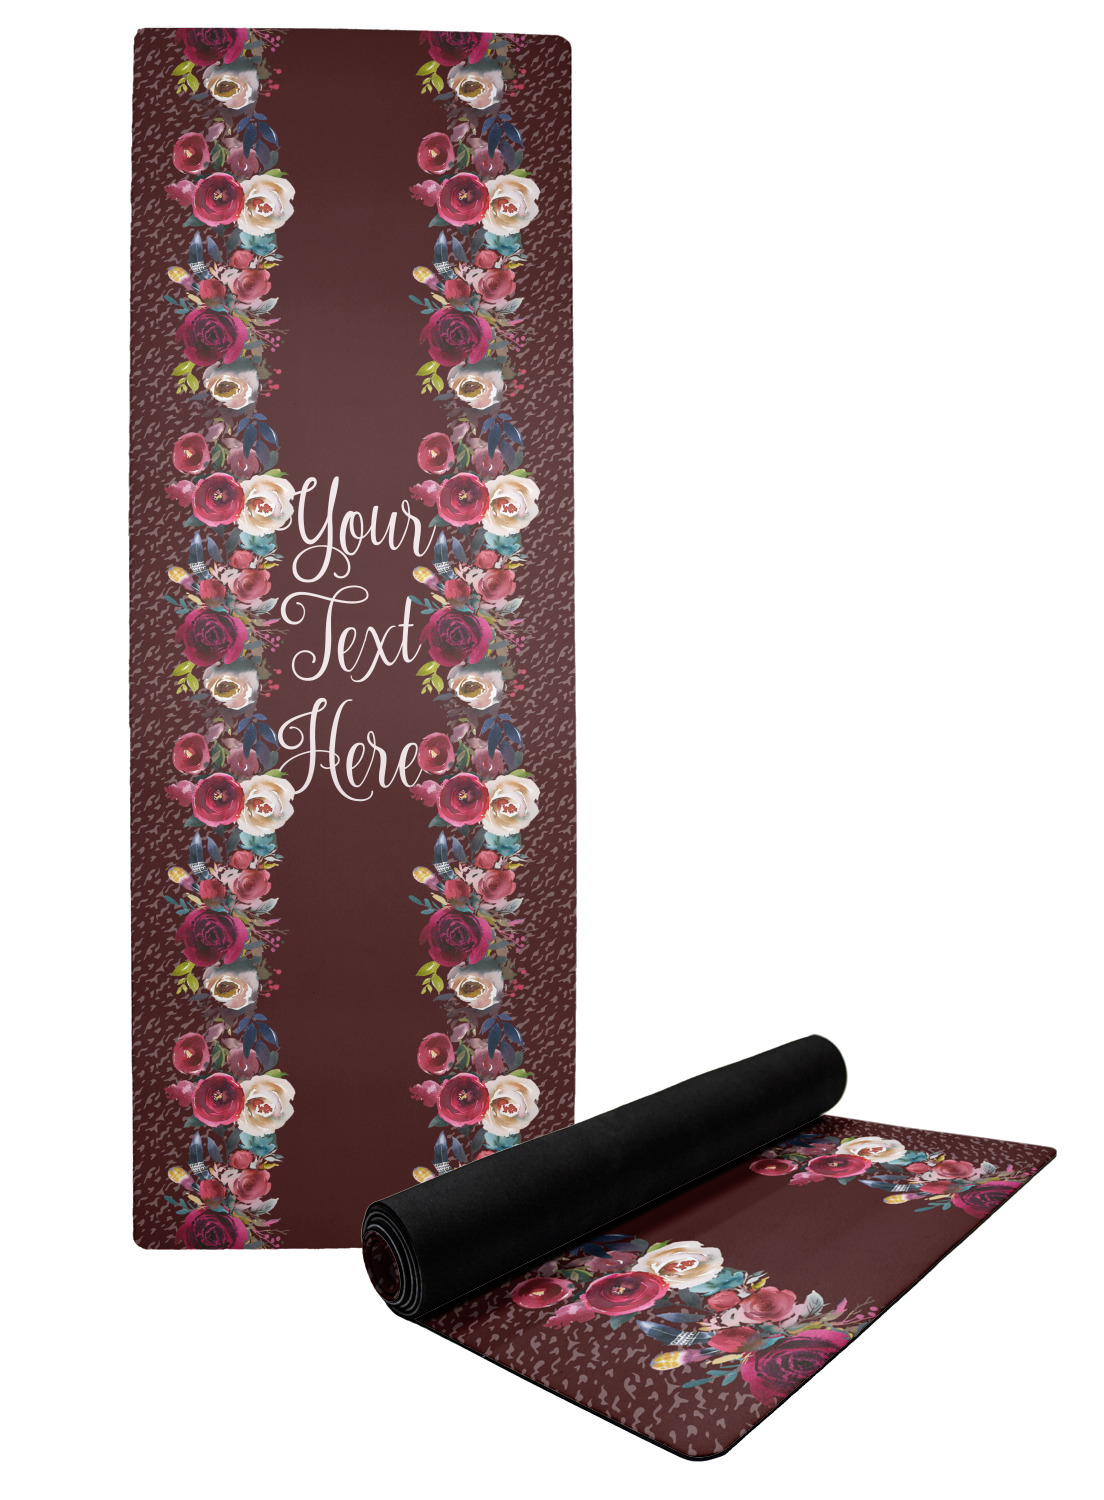 https://www.youcustomizeit.com/common/MAKE/2605372/Boho-Floral2-Yoga-Mat-with-Black-Rubber-Back-Full-Print-View.jpg?lm=1570417526